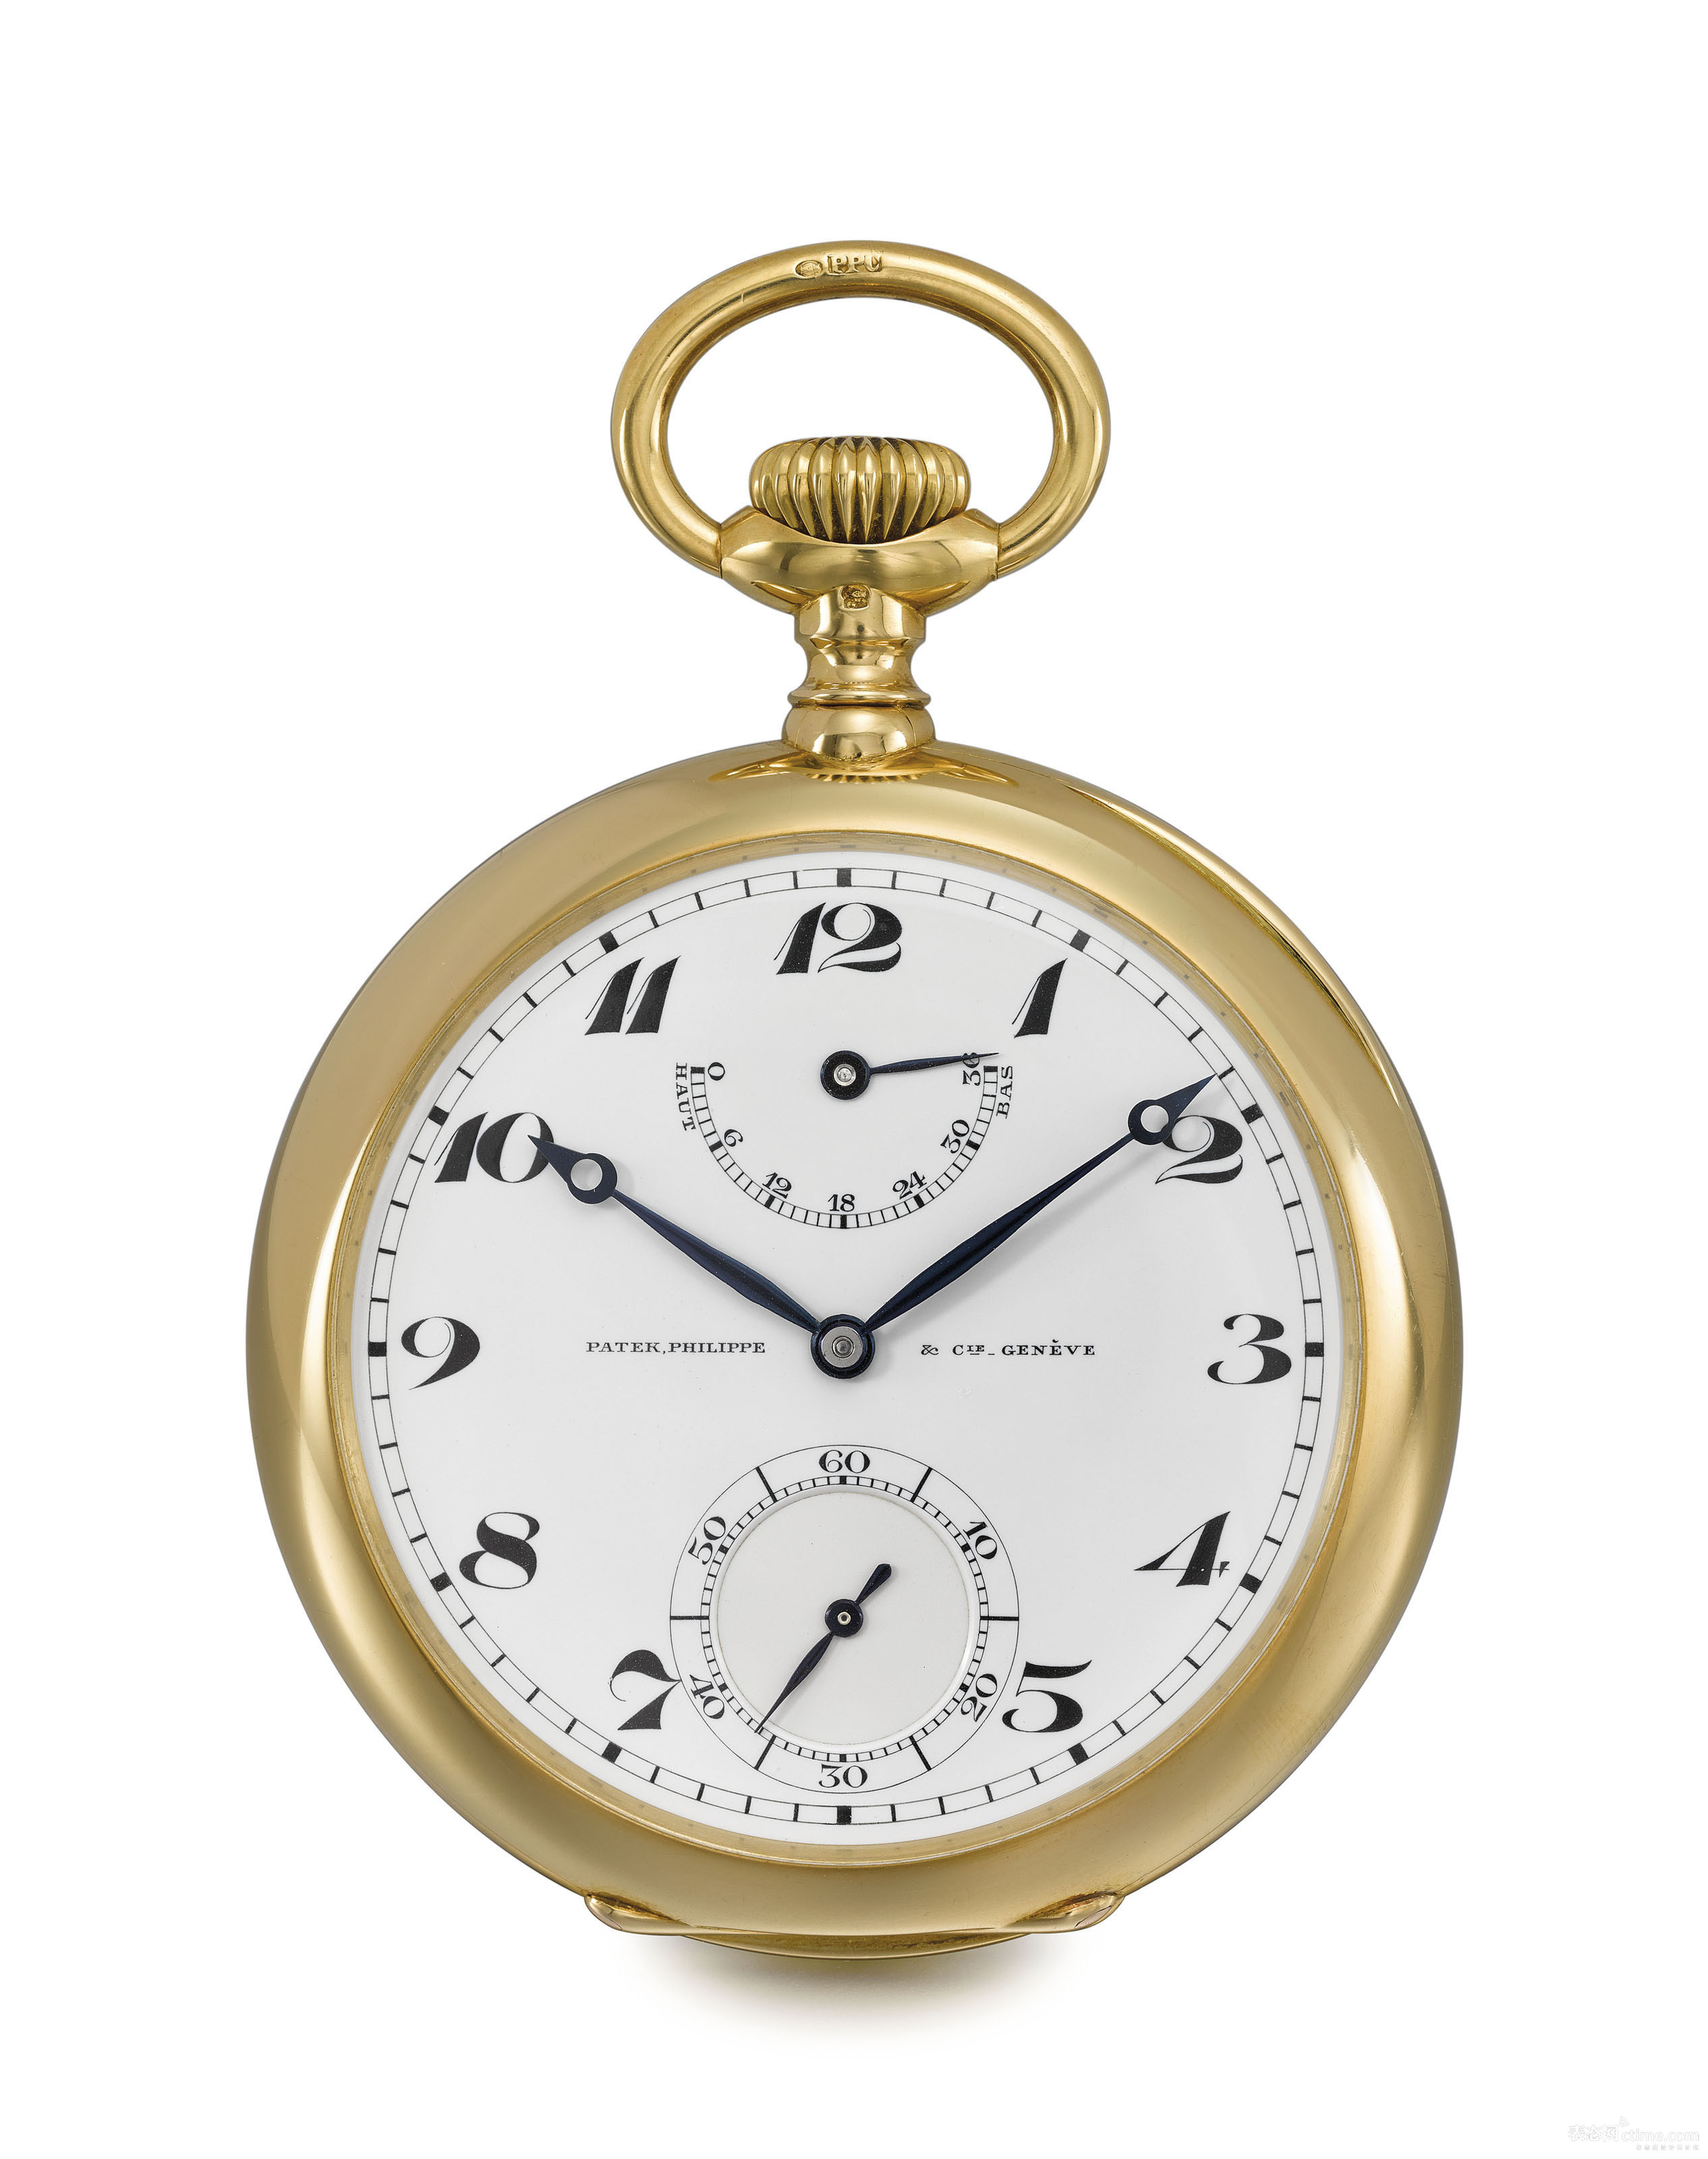 2019_GNV_17290_0245_000(patek_philippe_an_extremely_fine_very_rare_and_large_18k_gold_observat).jpg